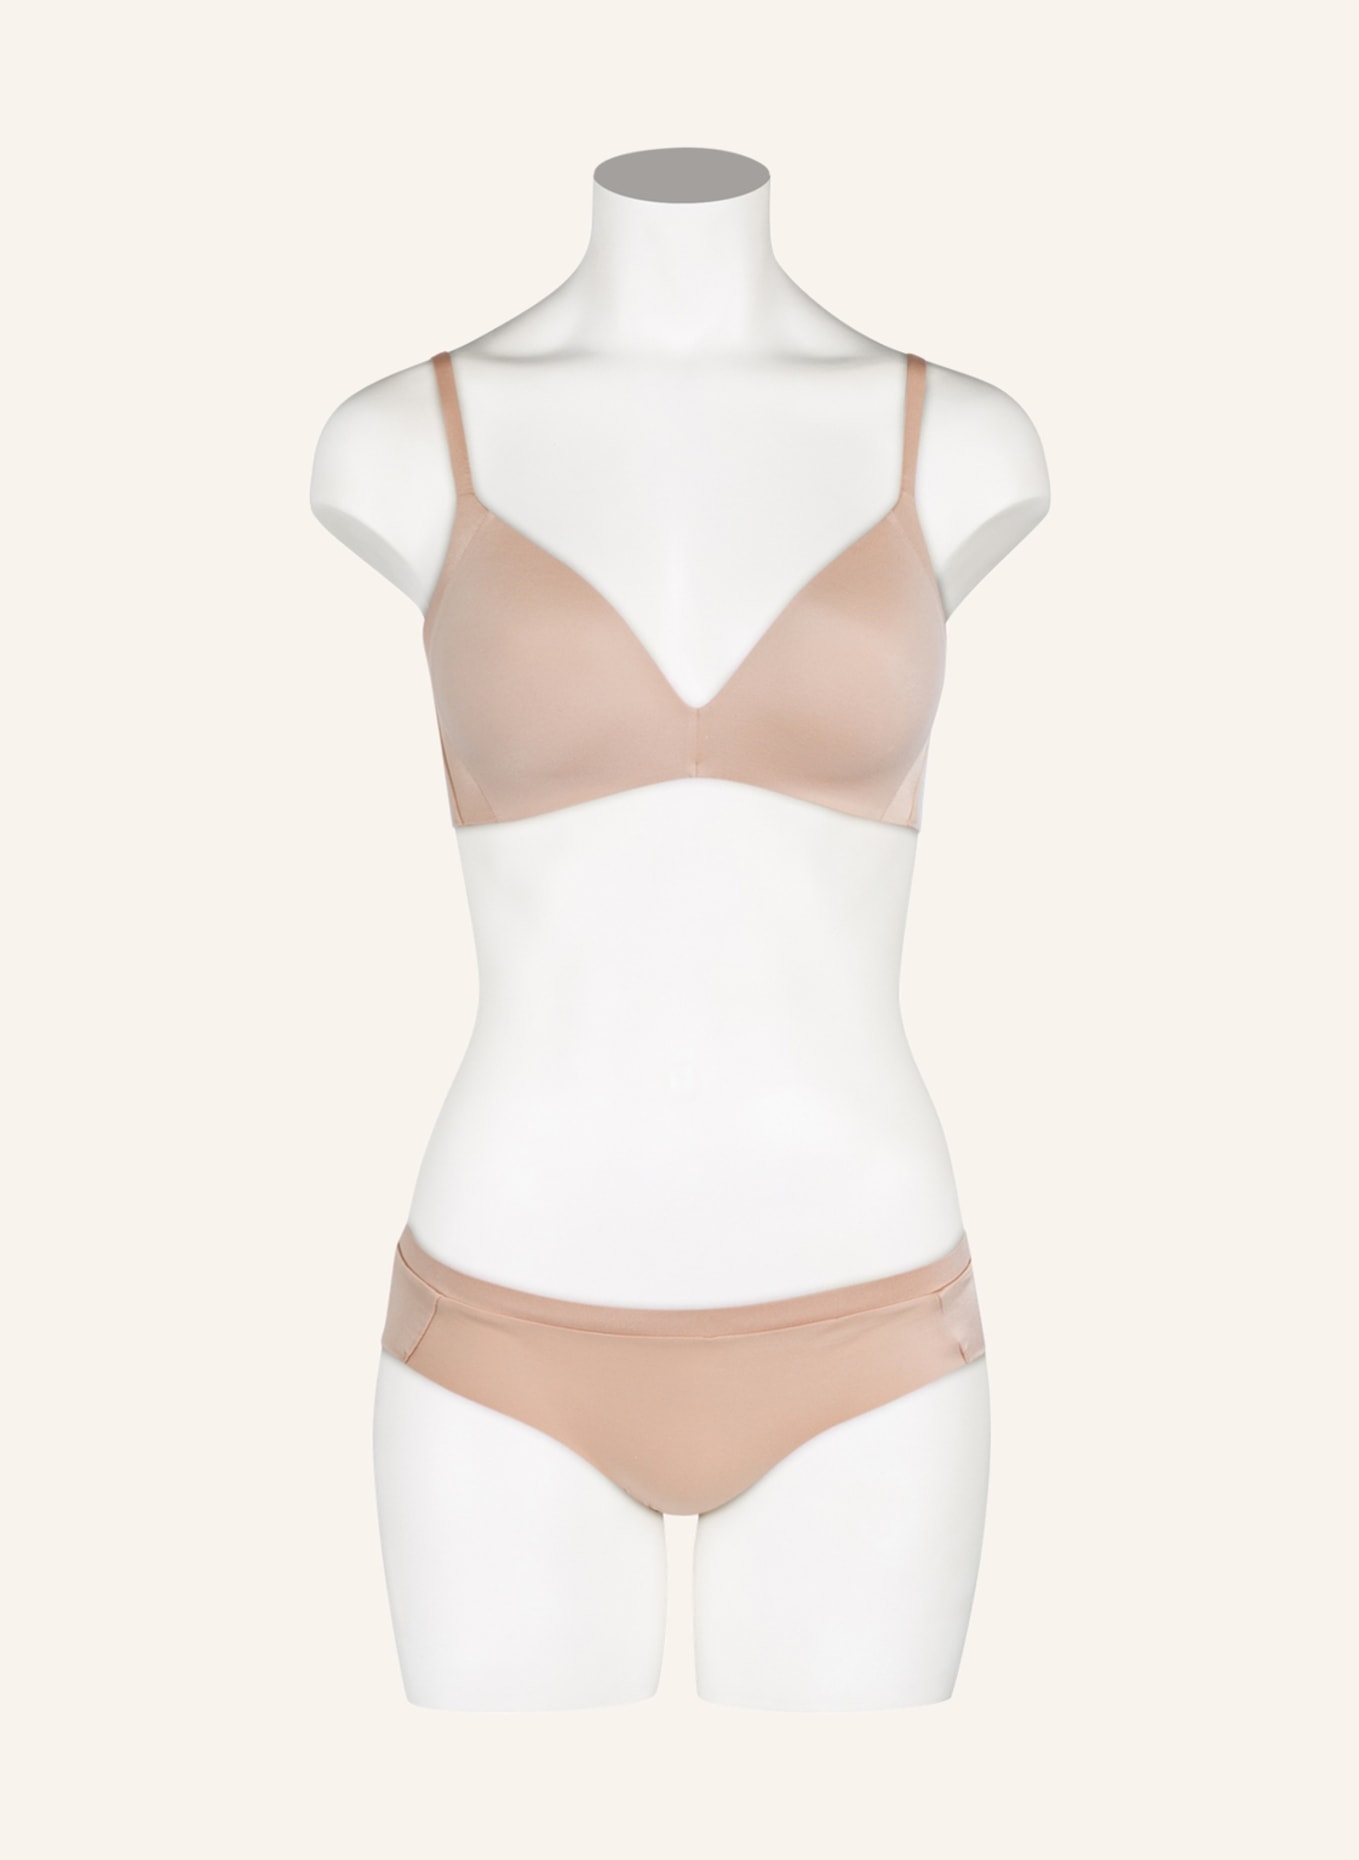 Triumph T-shirt bra BODY MAKE-UP SOFT TOUCH , Color: NUDE (Image 2)